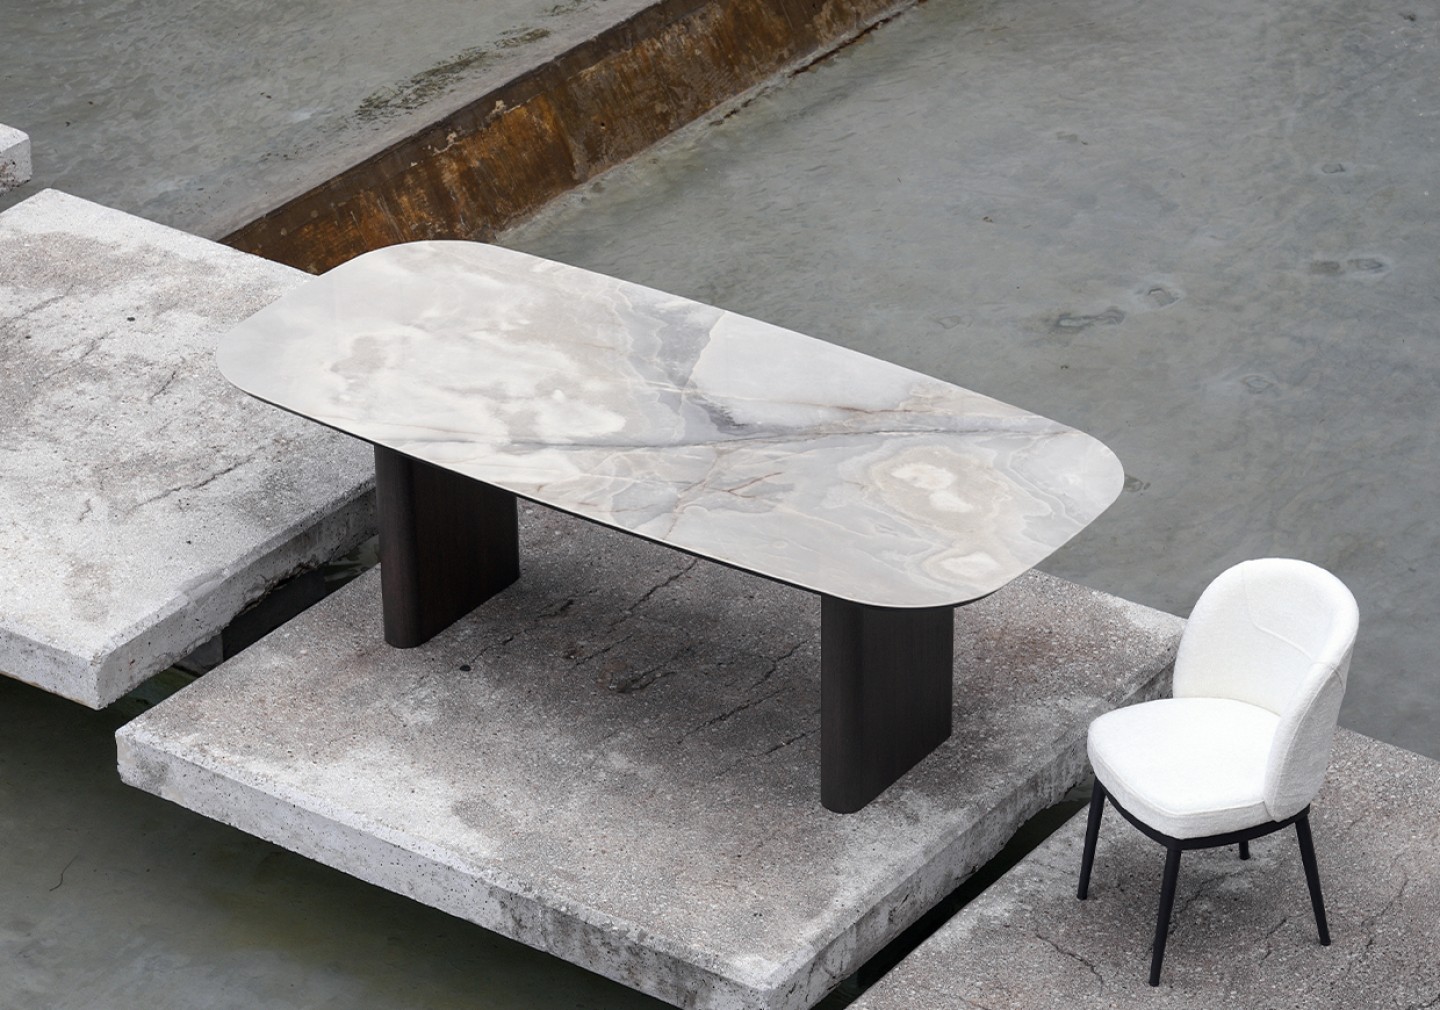 THE AMELIA DINING TABLE